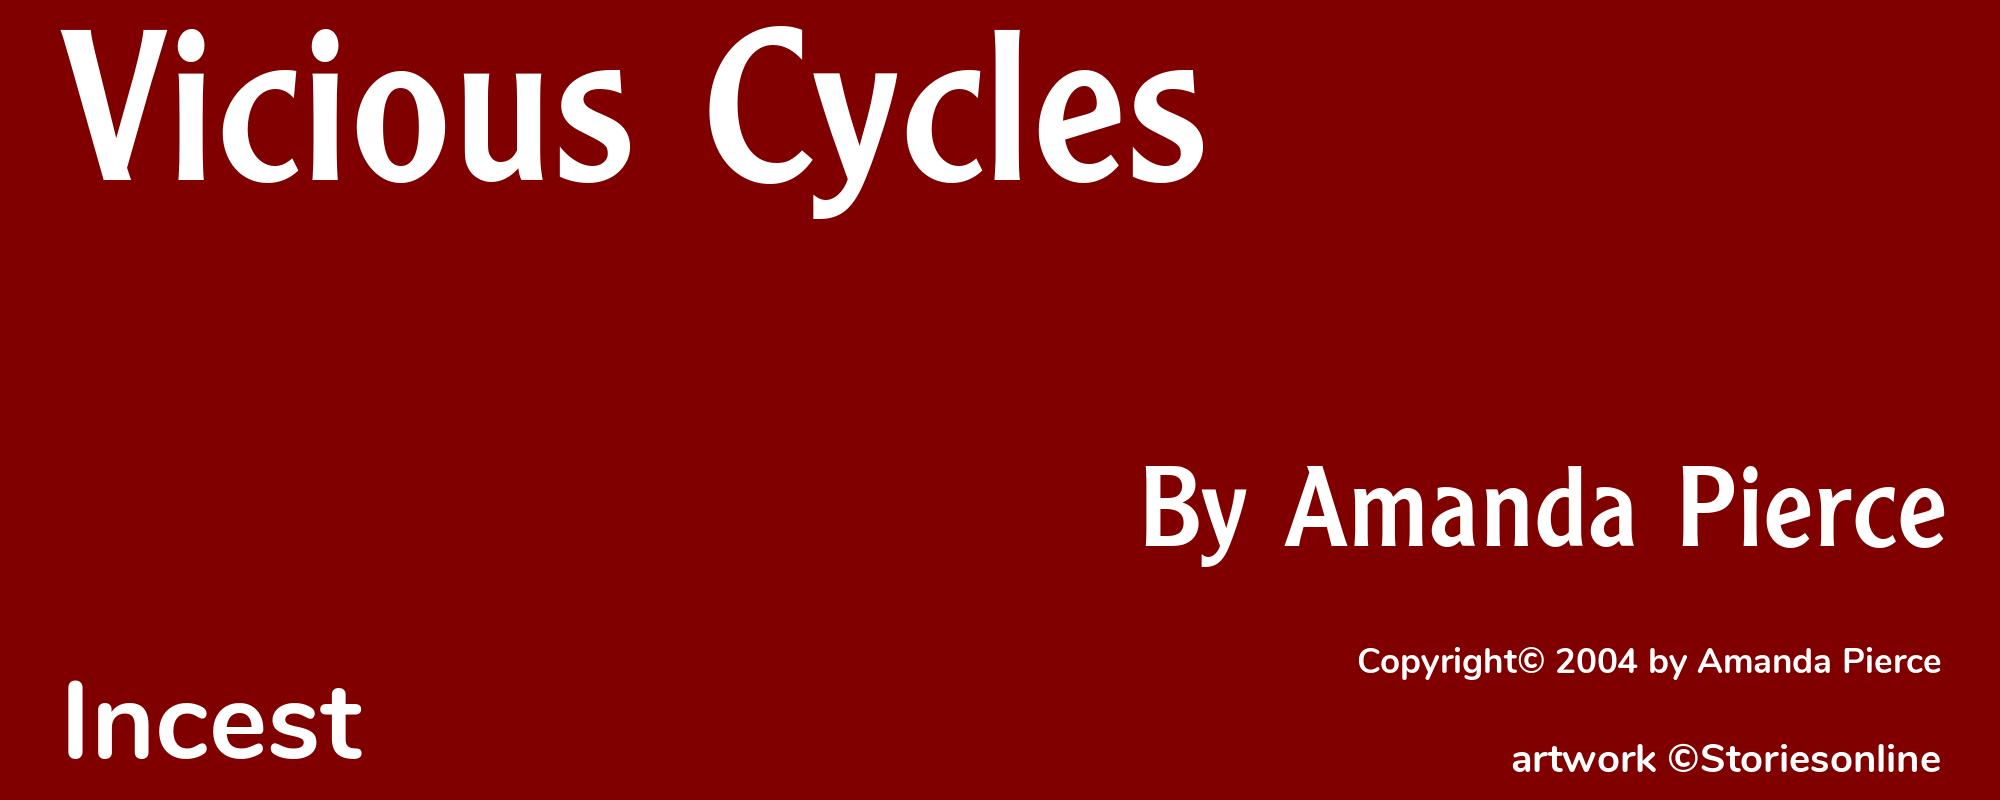 Vicious Cycles - Cover